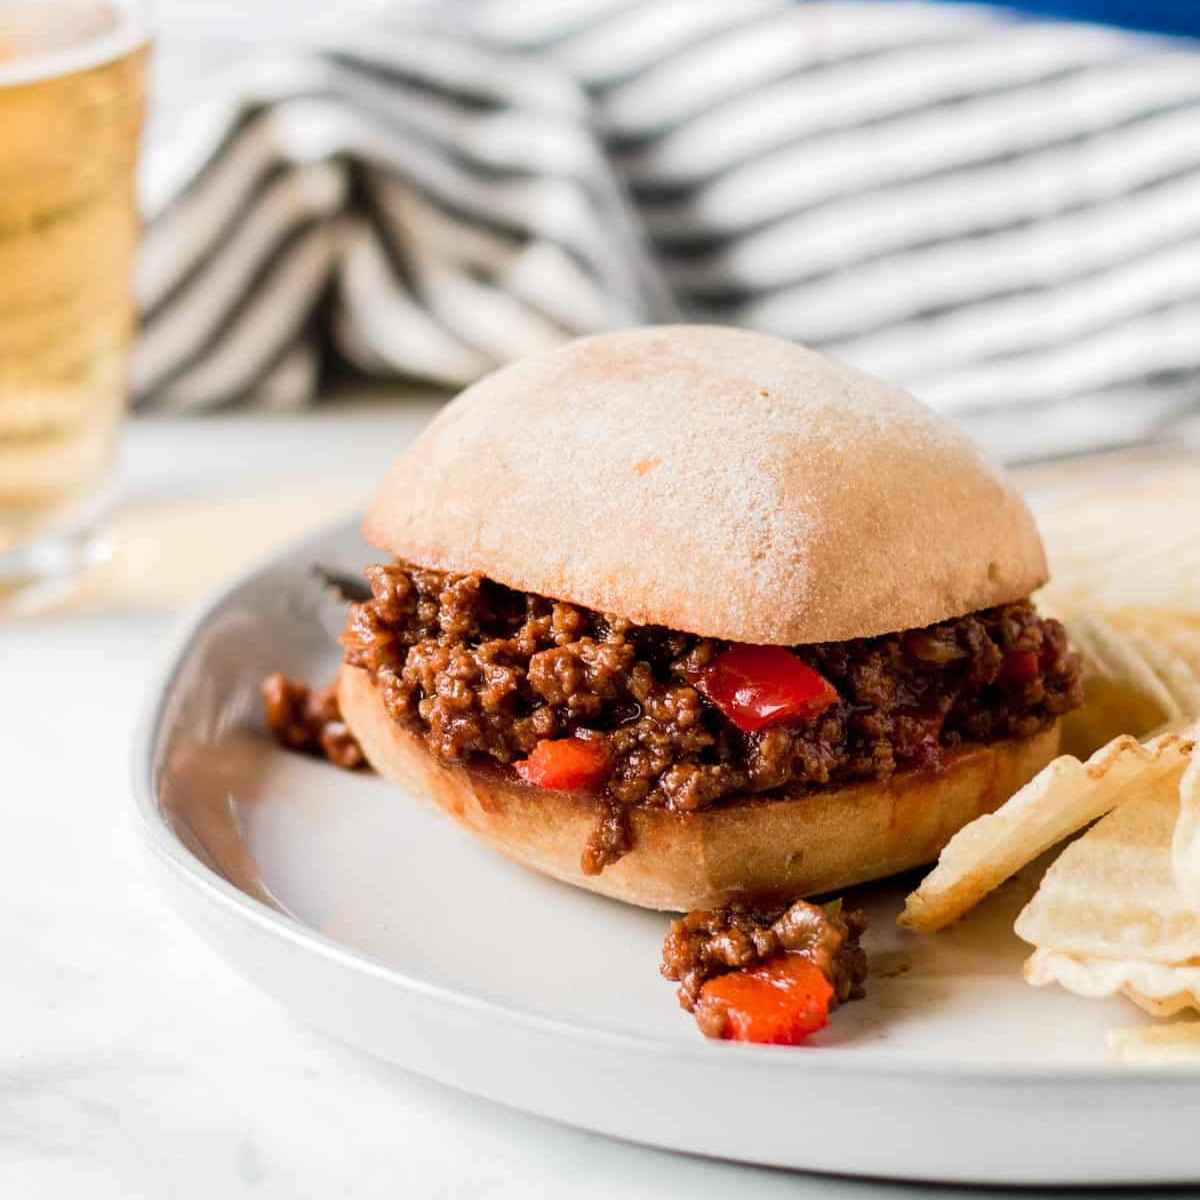 Gluten-free sloppy joe sandwich on a large white plate with chips on the side.